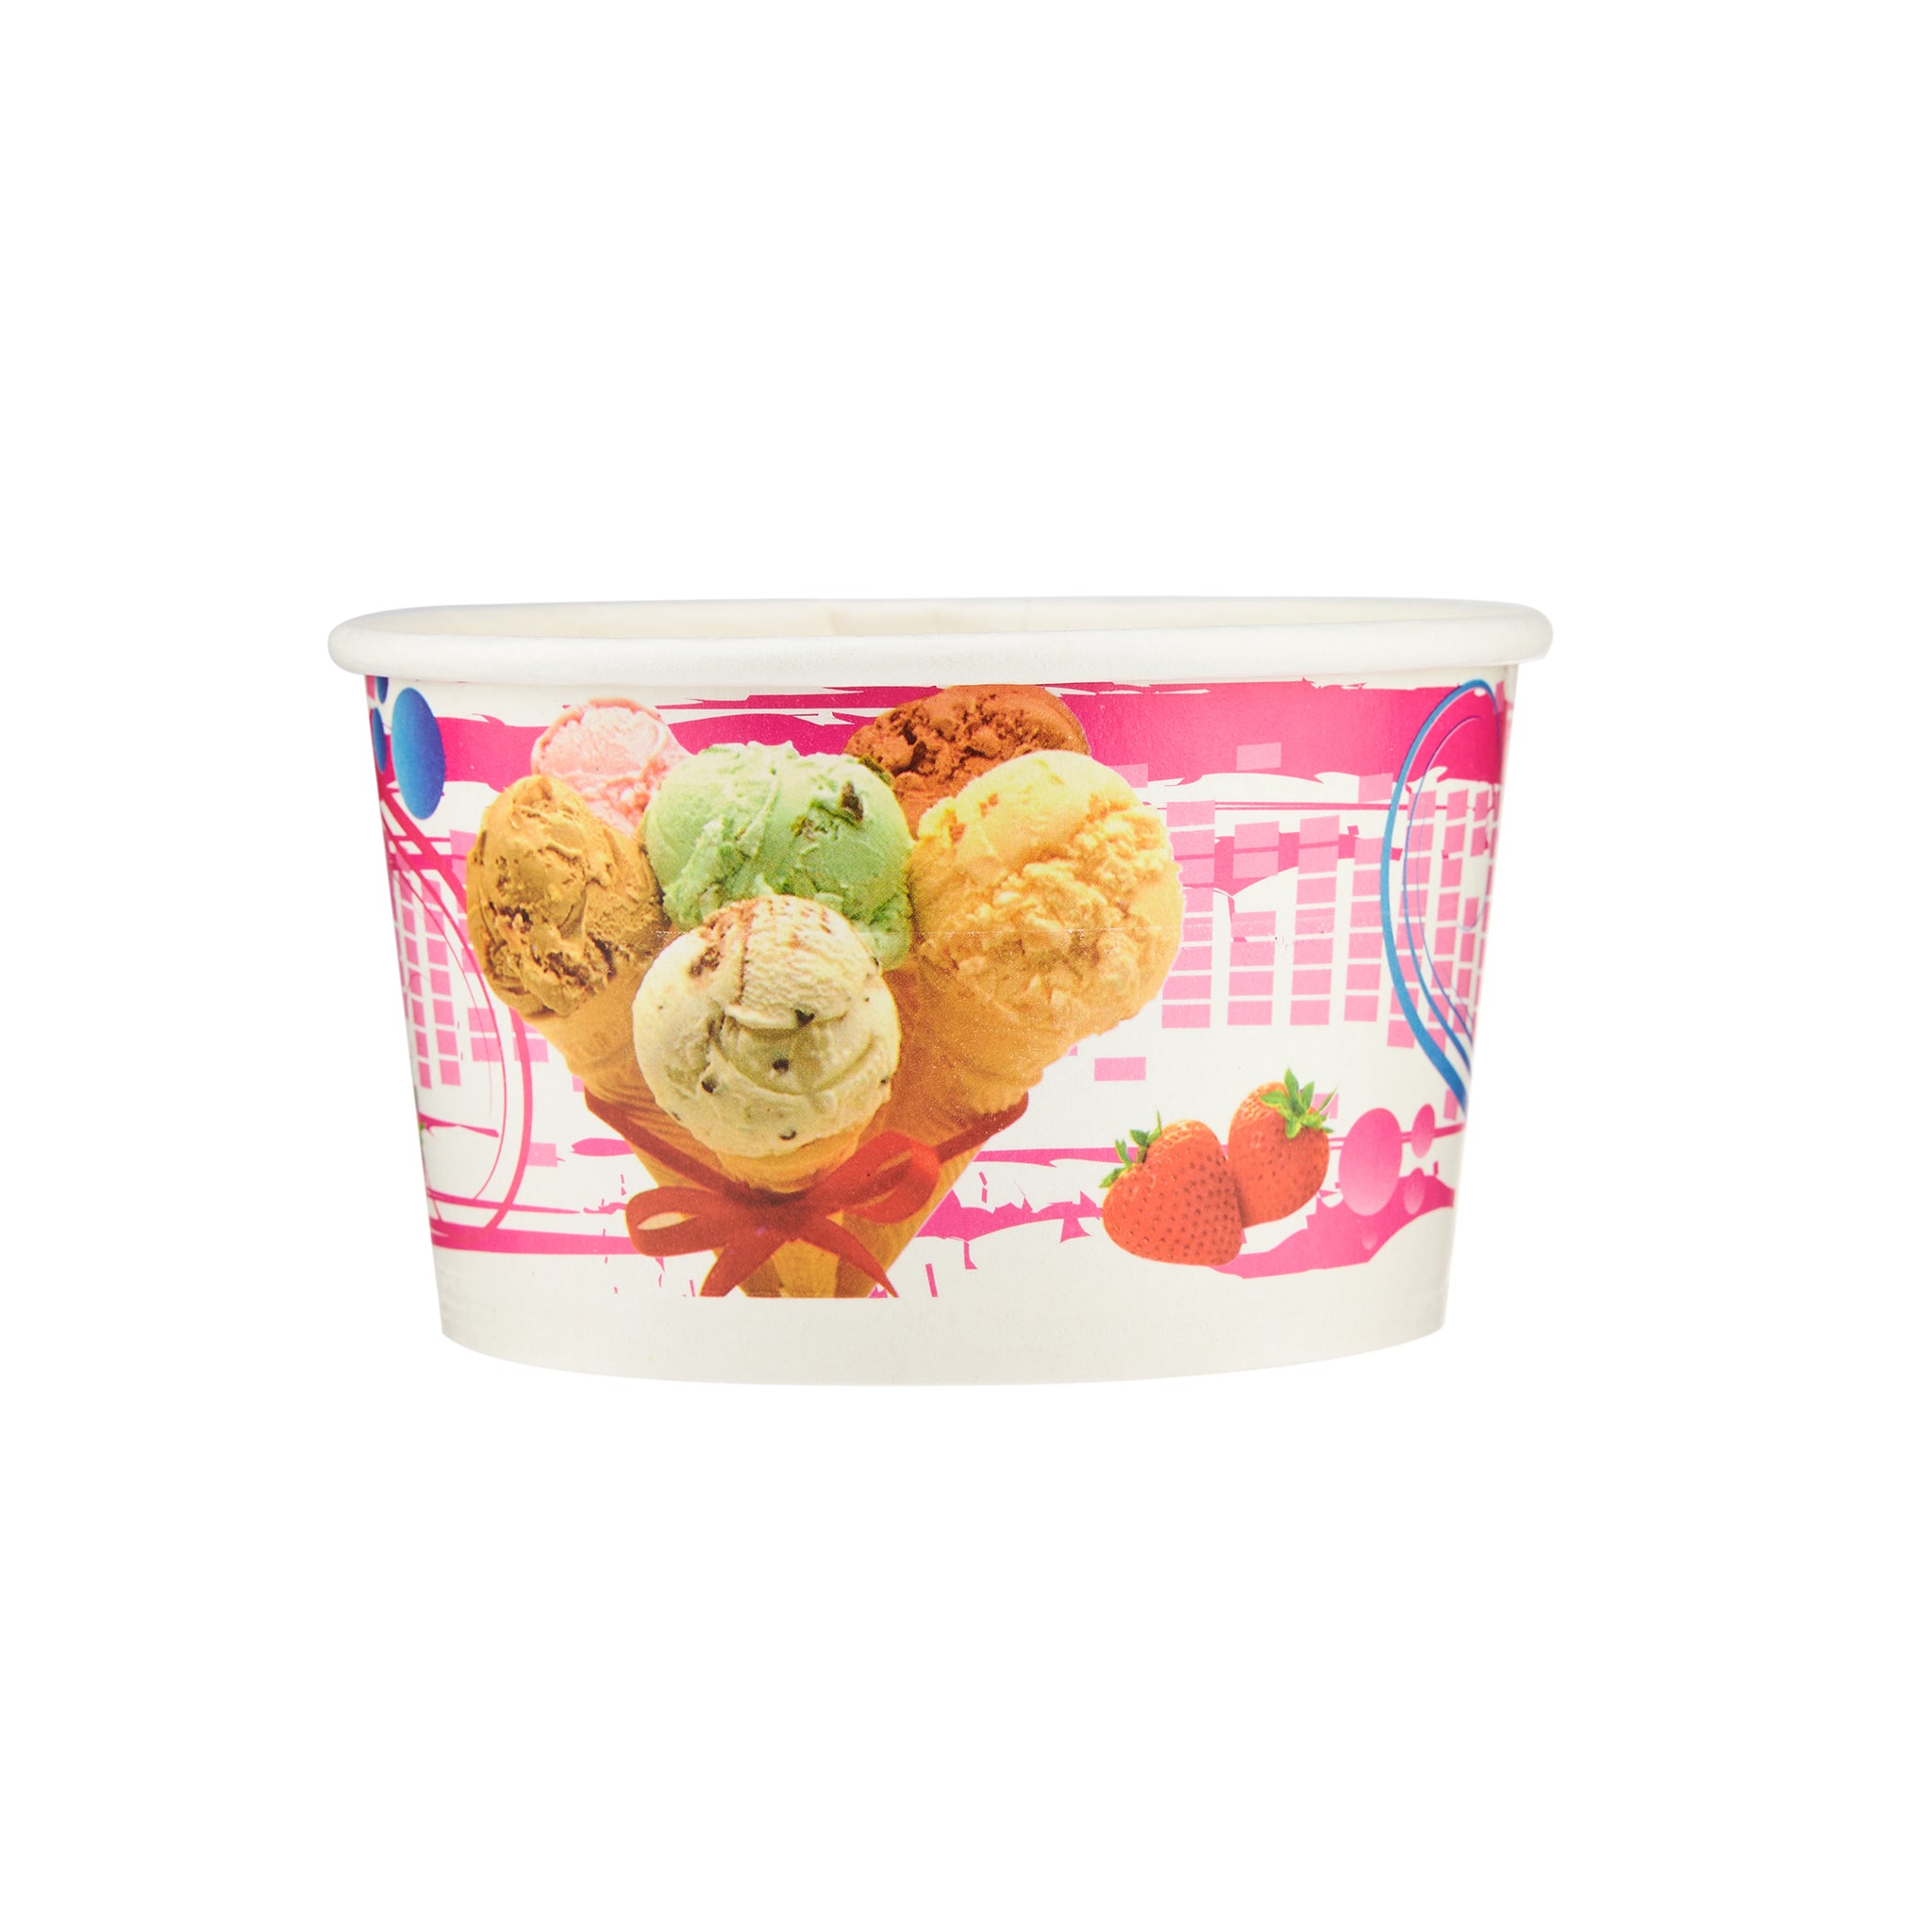 750ml Paper Ice Cream Cup 1000 Pieces - Hotpack Global